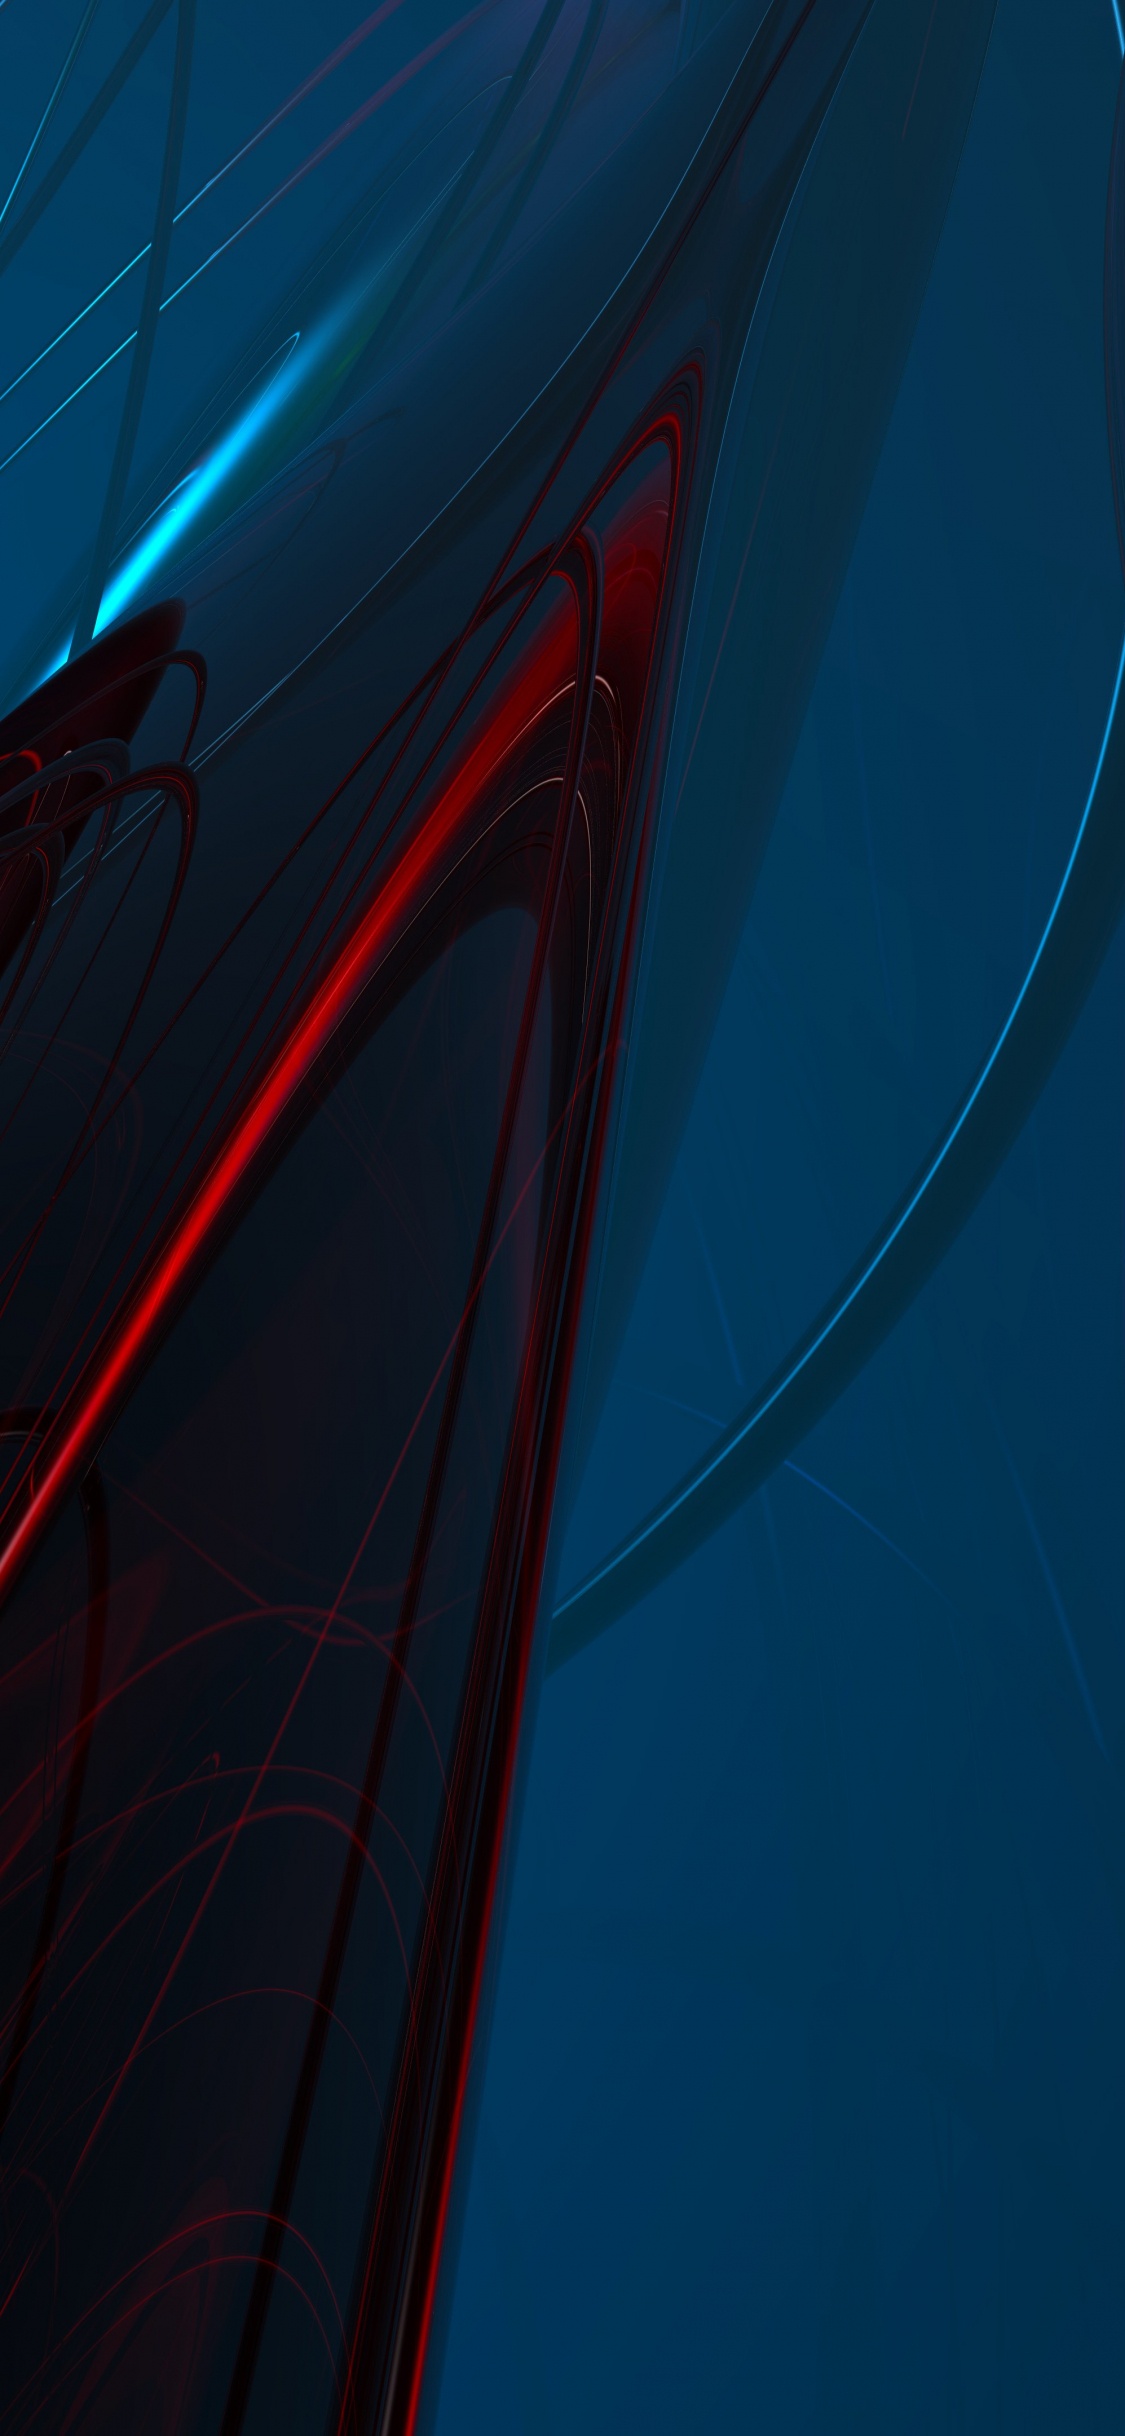 Blue and Red Light Streaks. Wallpaper in 1125x2436 Resolution